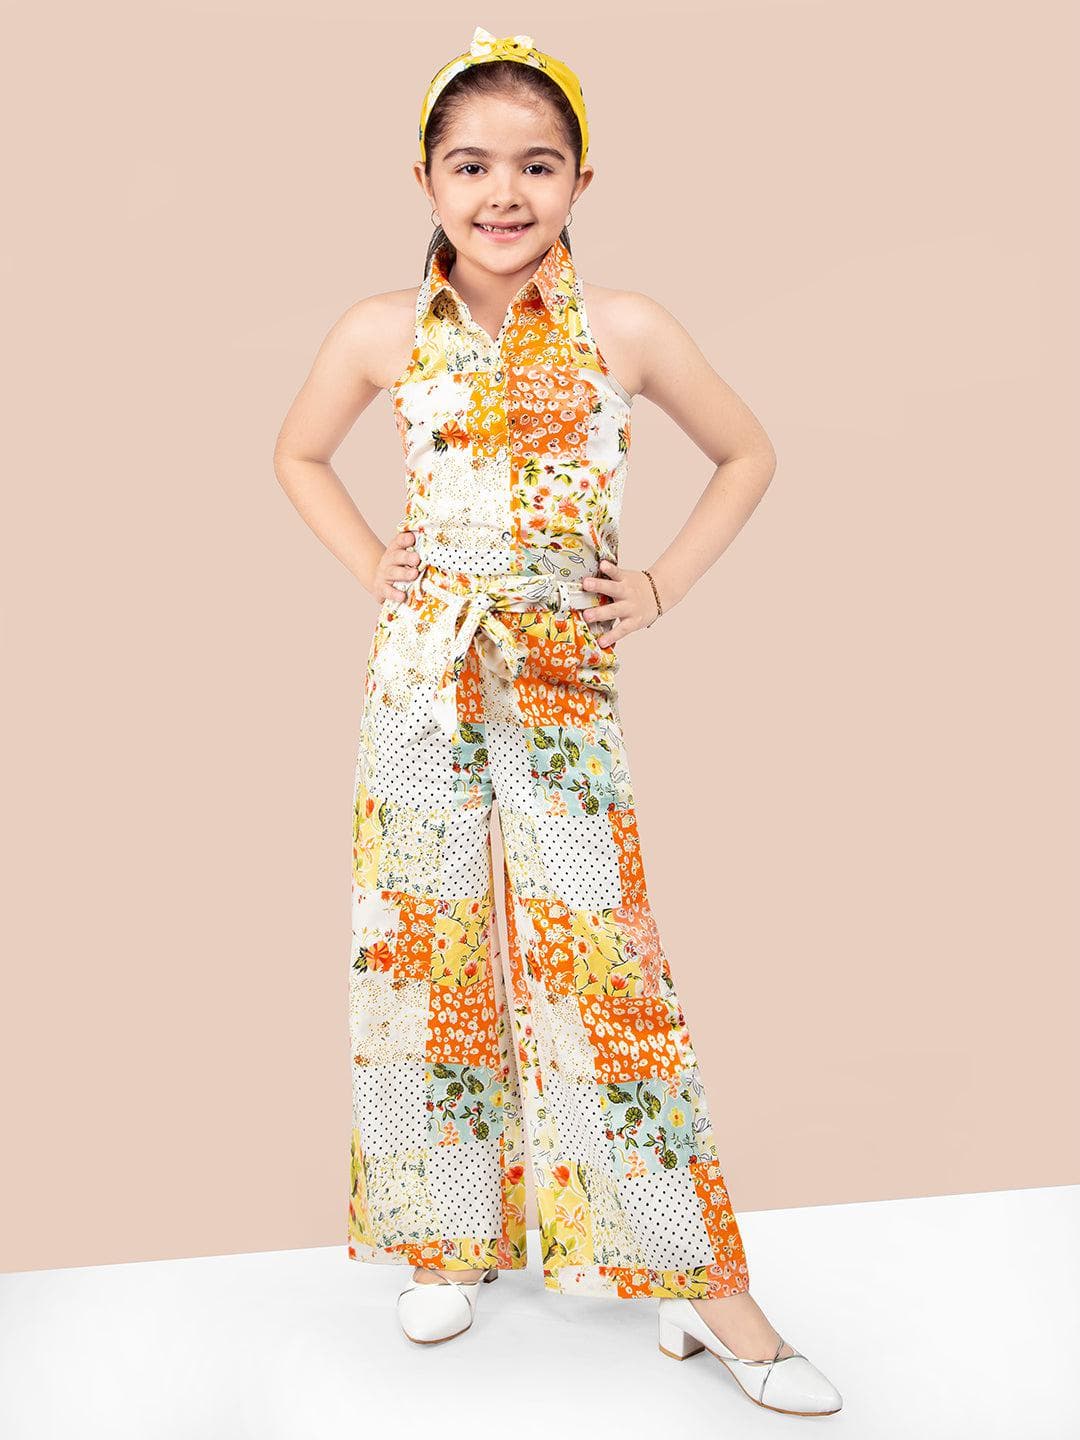 Naughty Ninos White & Orange Floral Printed Top With Palazzos Clothing Sets